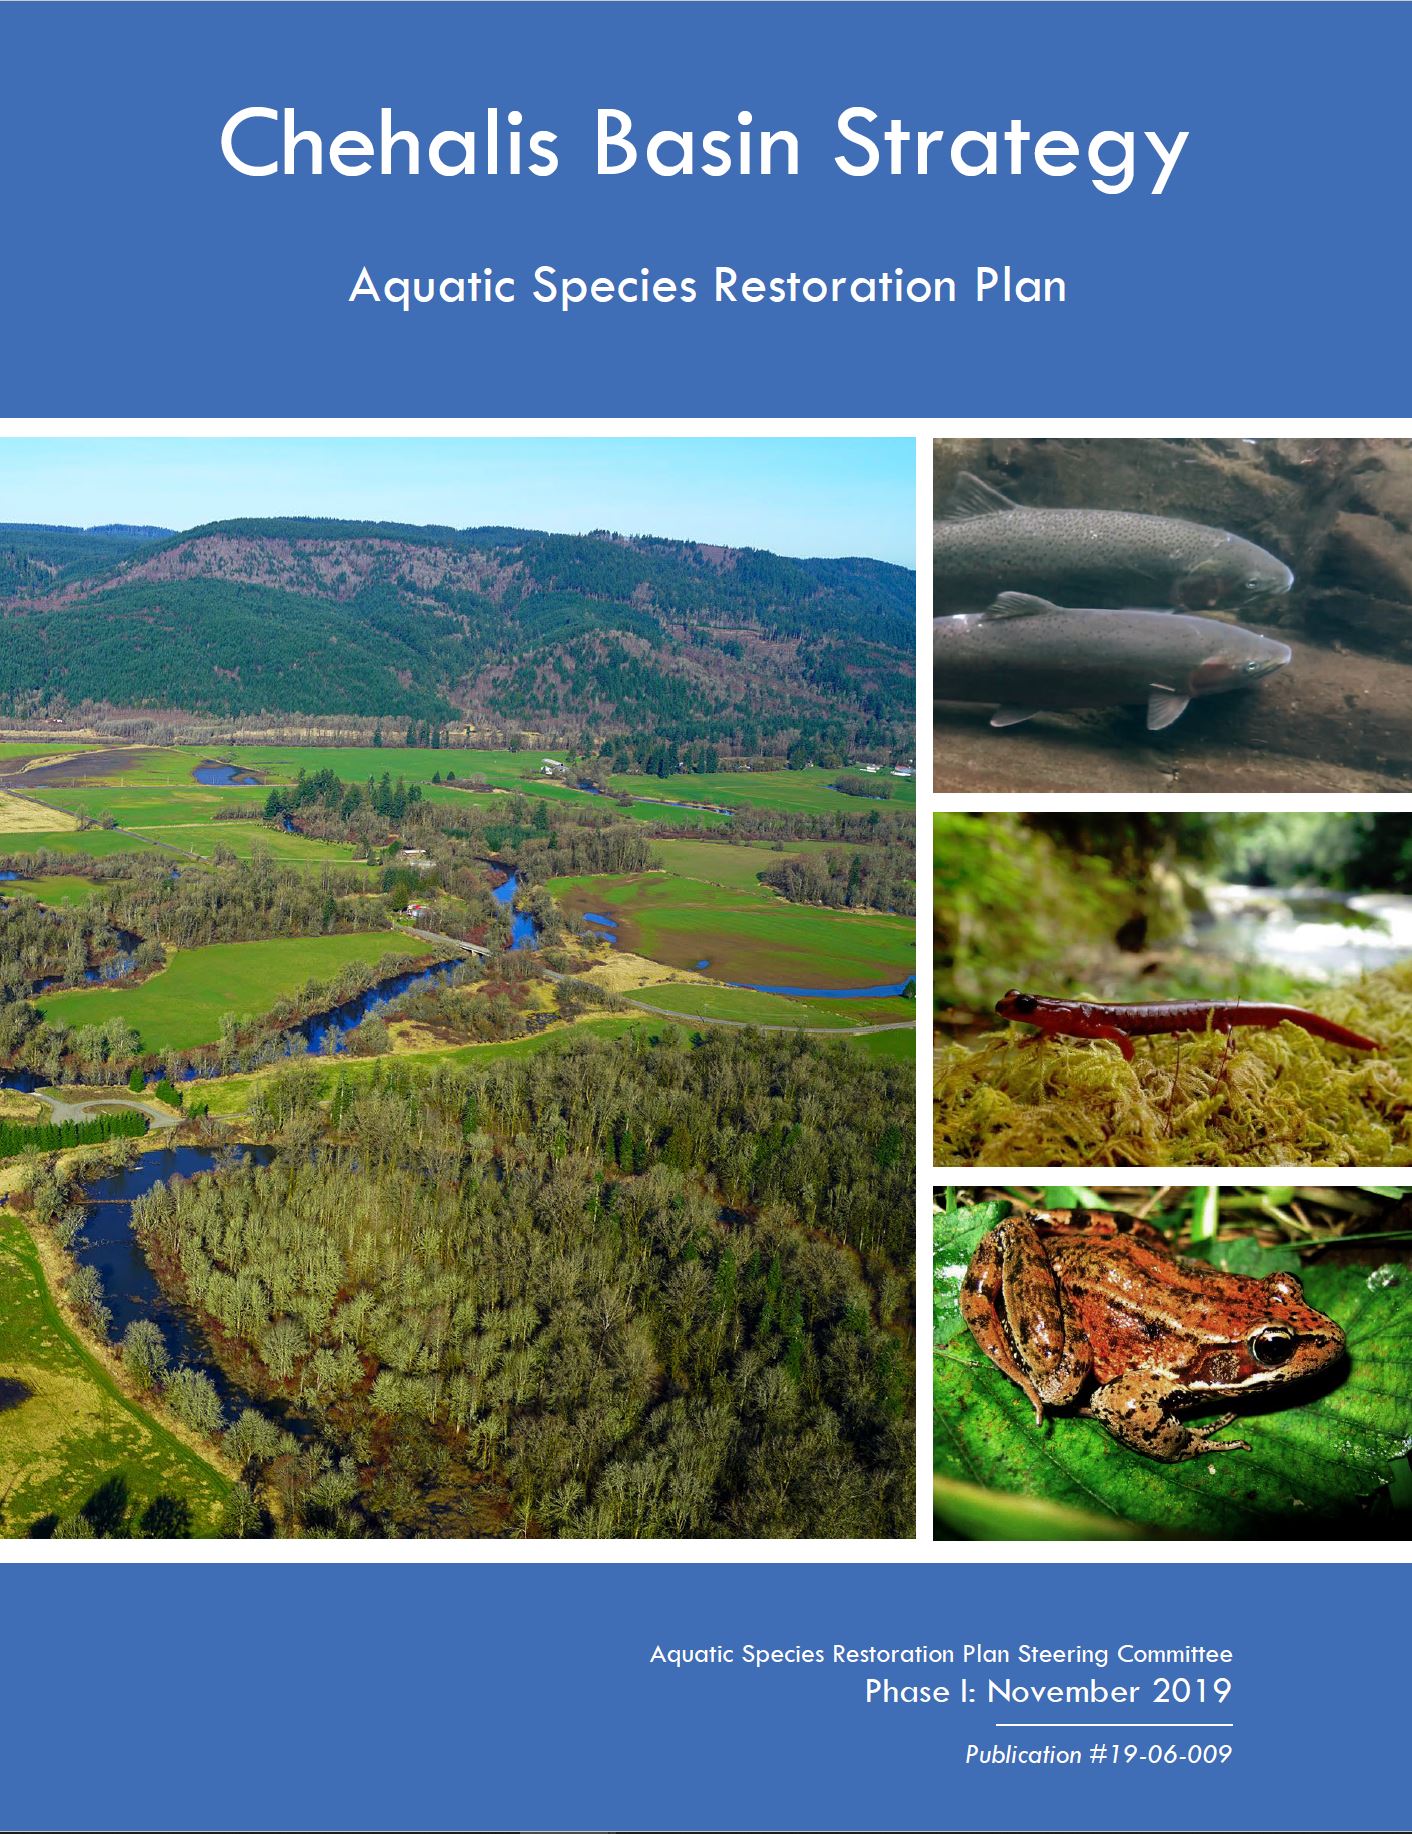 Front cover of the ASRP Publication featuring images of the Chehalis River, Salmon, a red-striped frog, and a salamander.